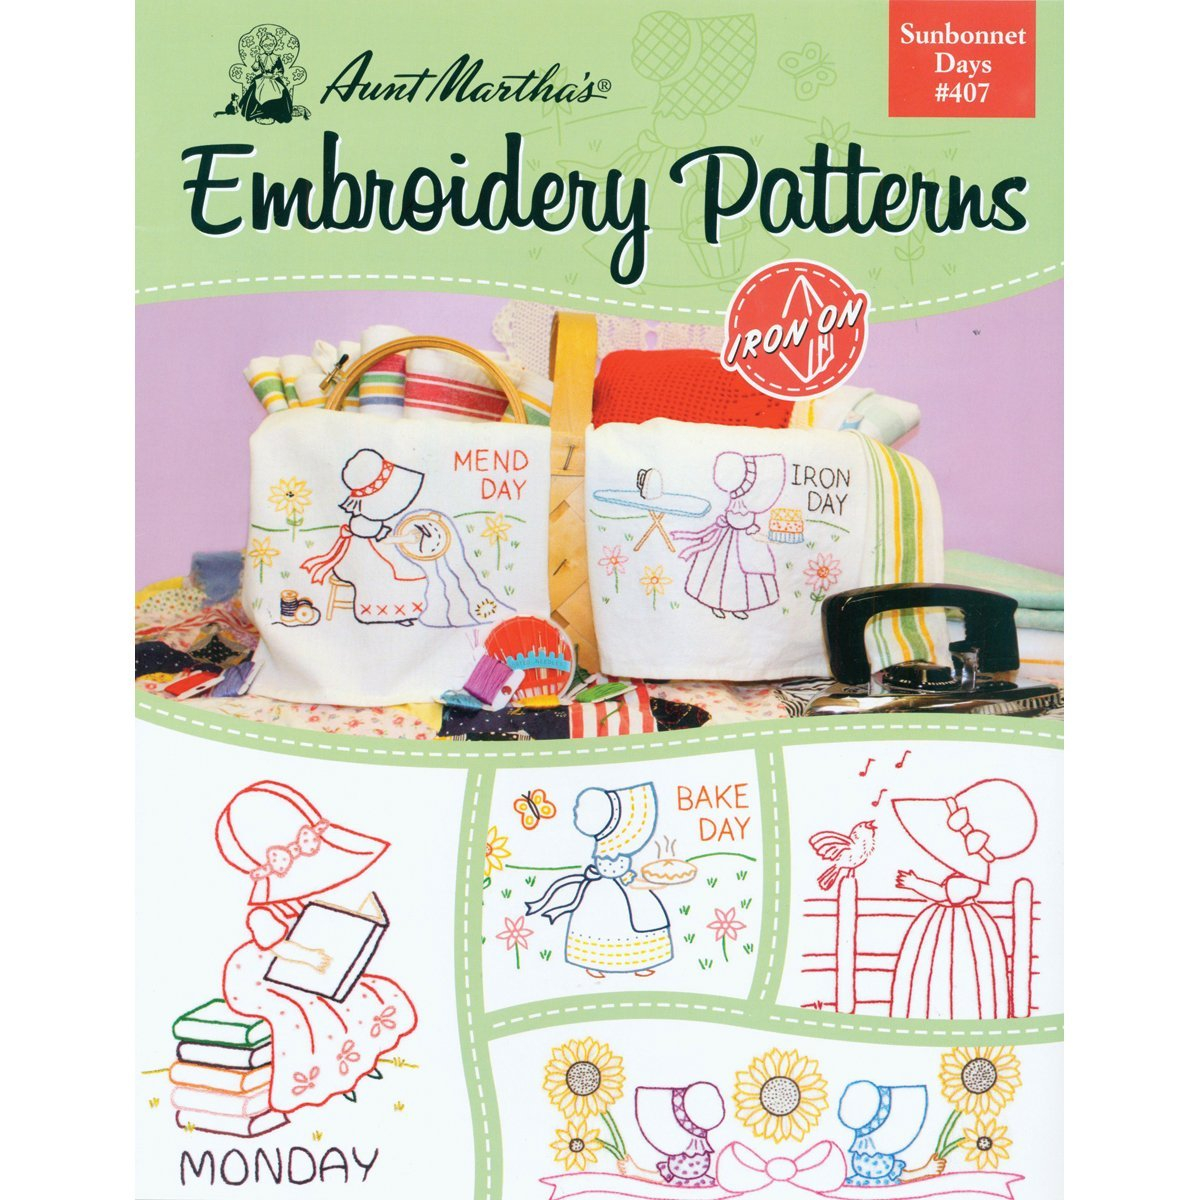 Hand Embroidery Pattern Books Aunt Marthas Sunbonnet Days Embroidery Transfer Pattern Book Kit Designs Include Various Sunbonnet Girl Designs As Well As 2 Pillowcase Hem